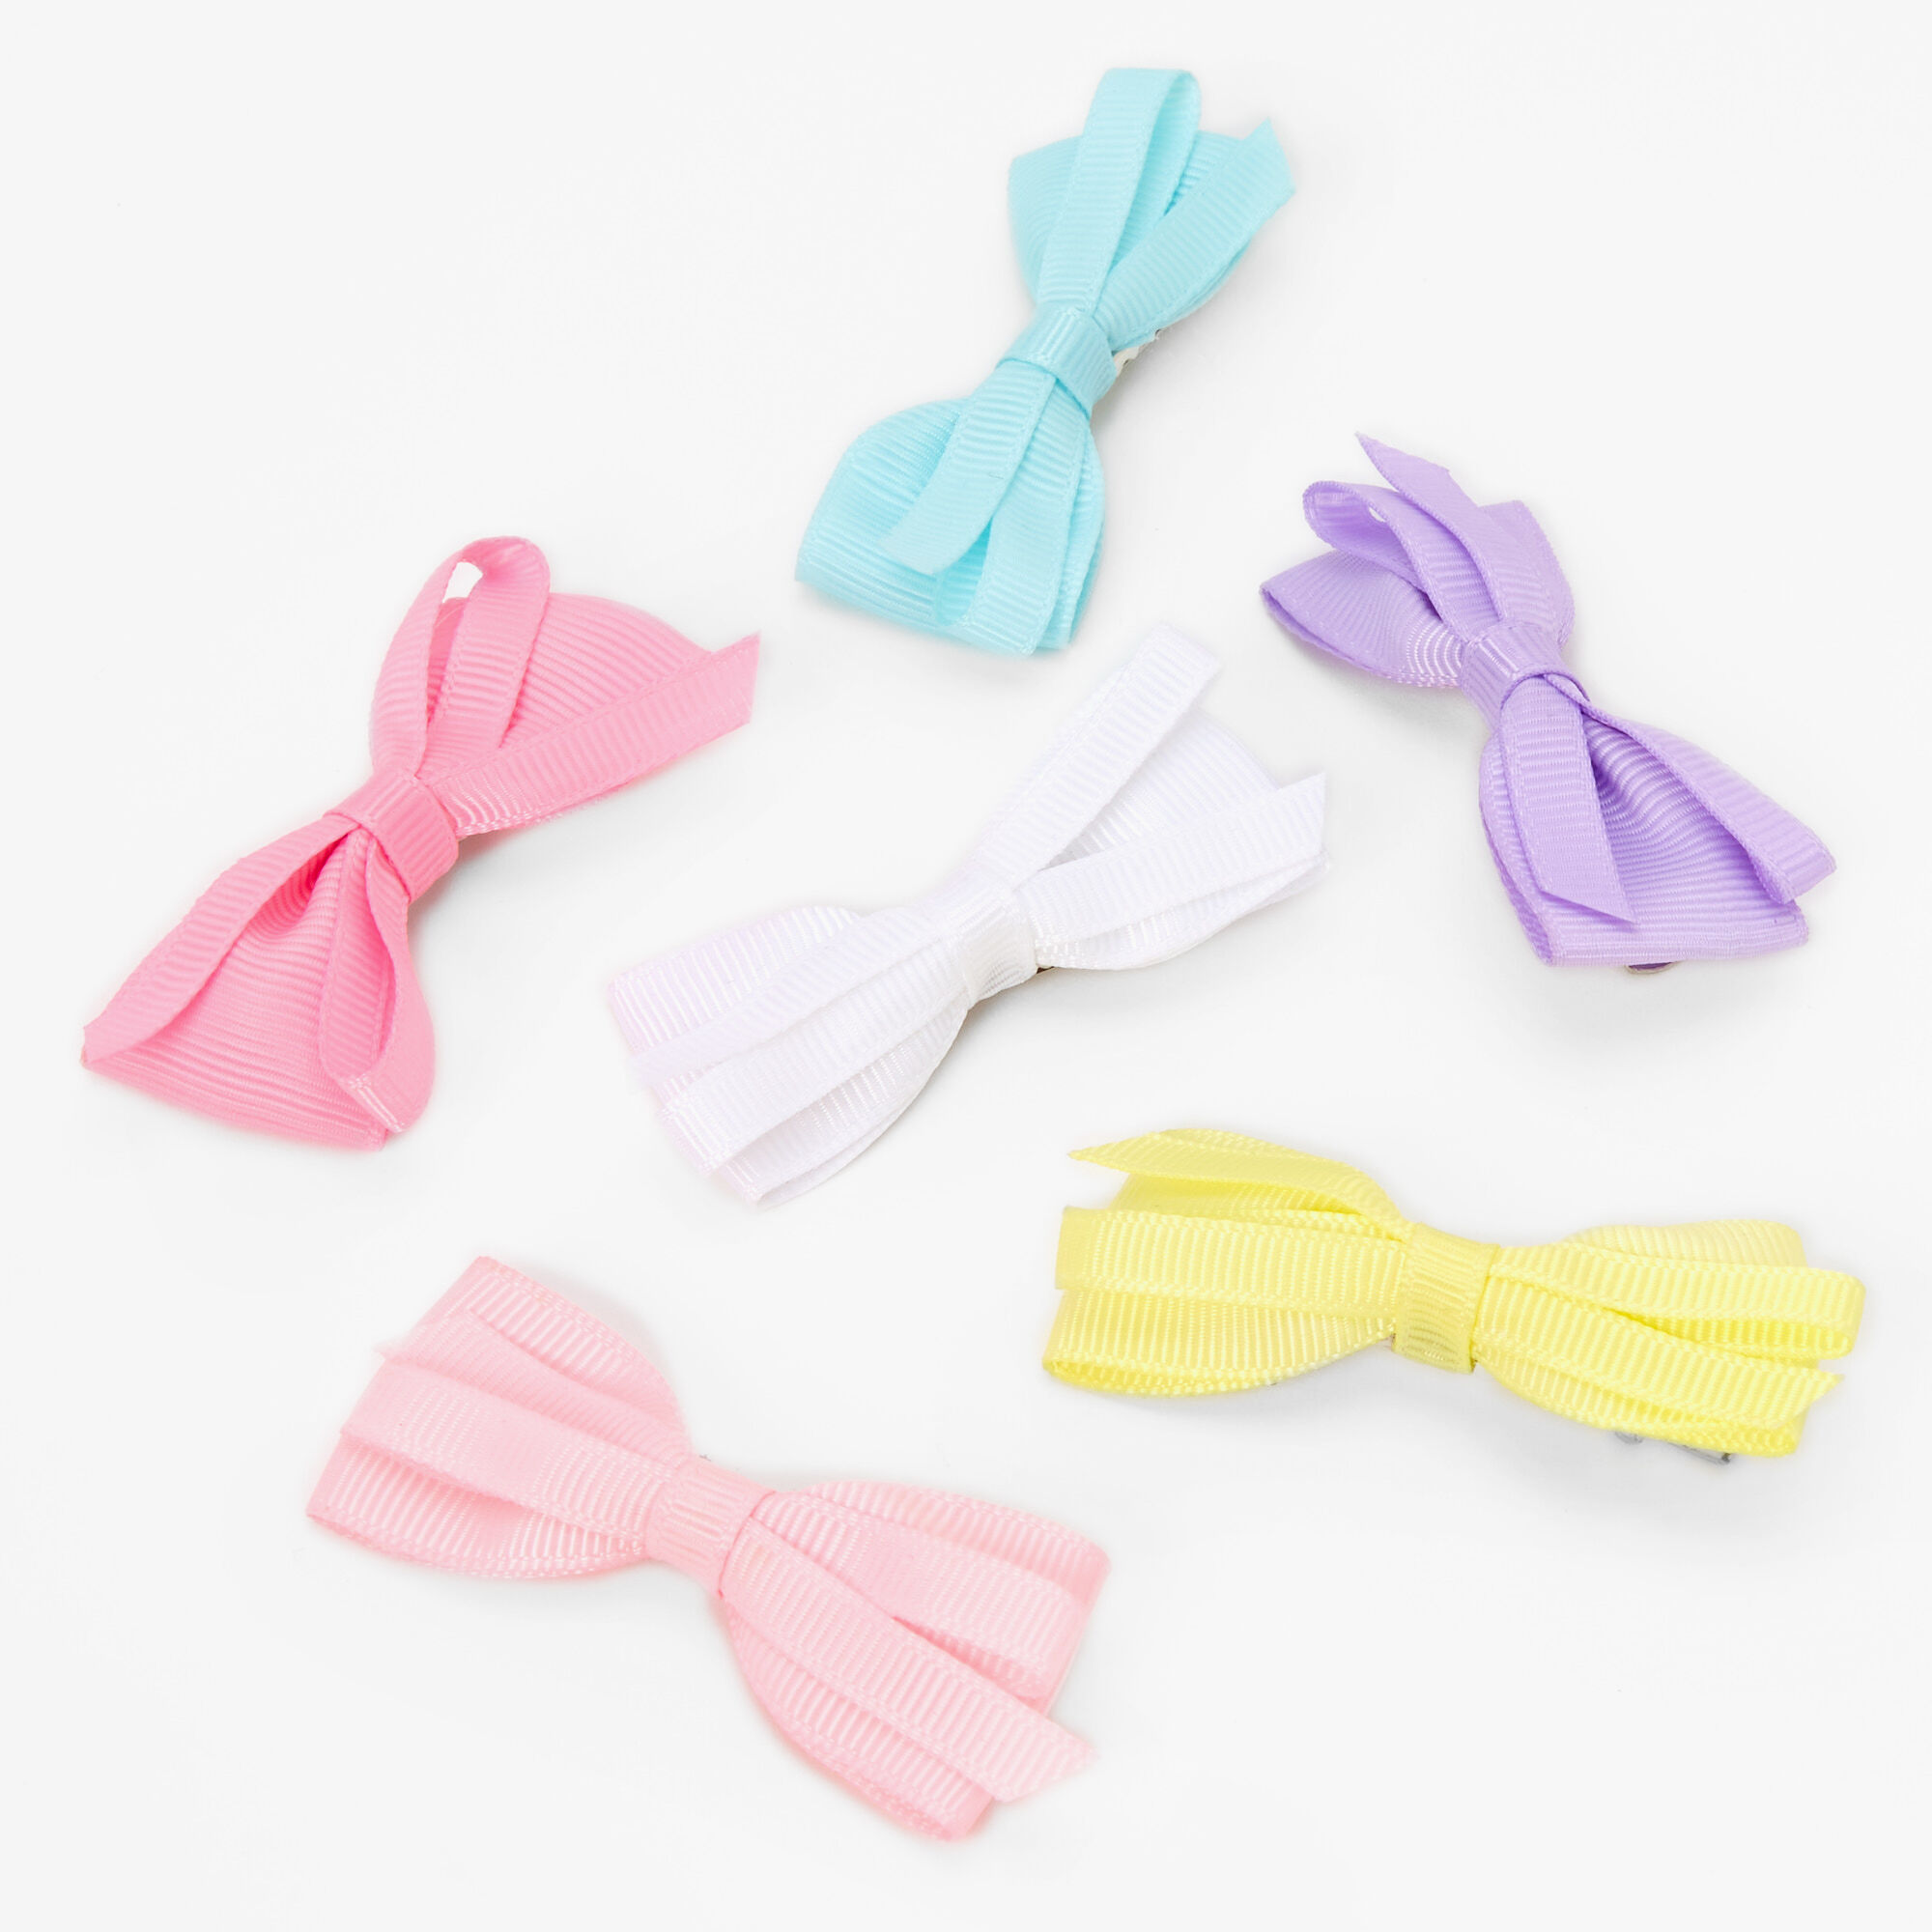 View Claires Club Preppy Pastel Hair Bow Clips 6 Pack information